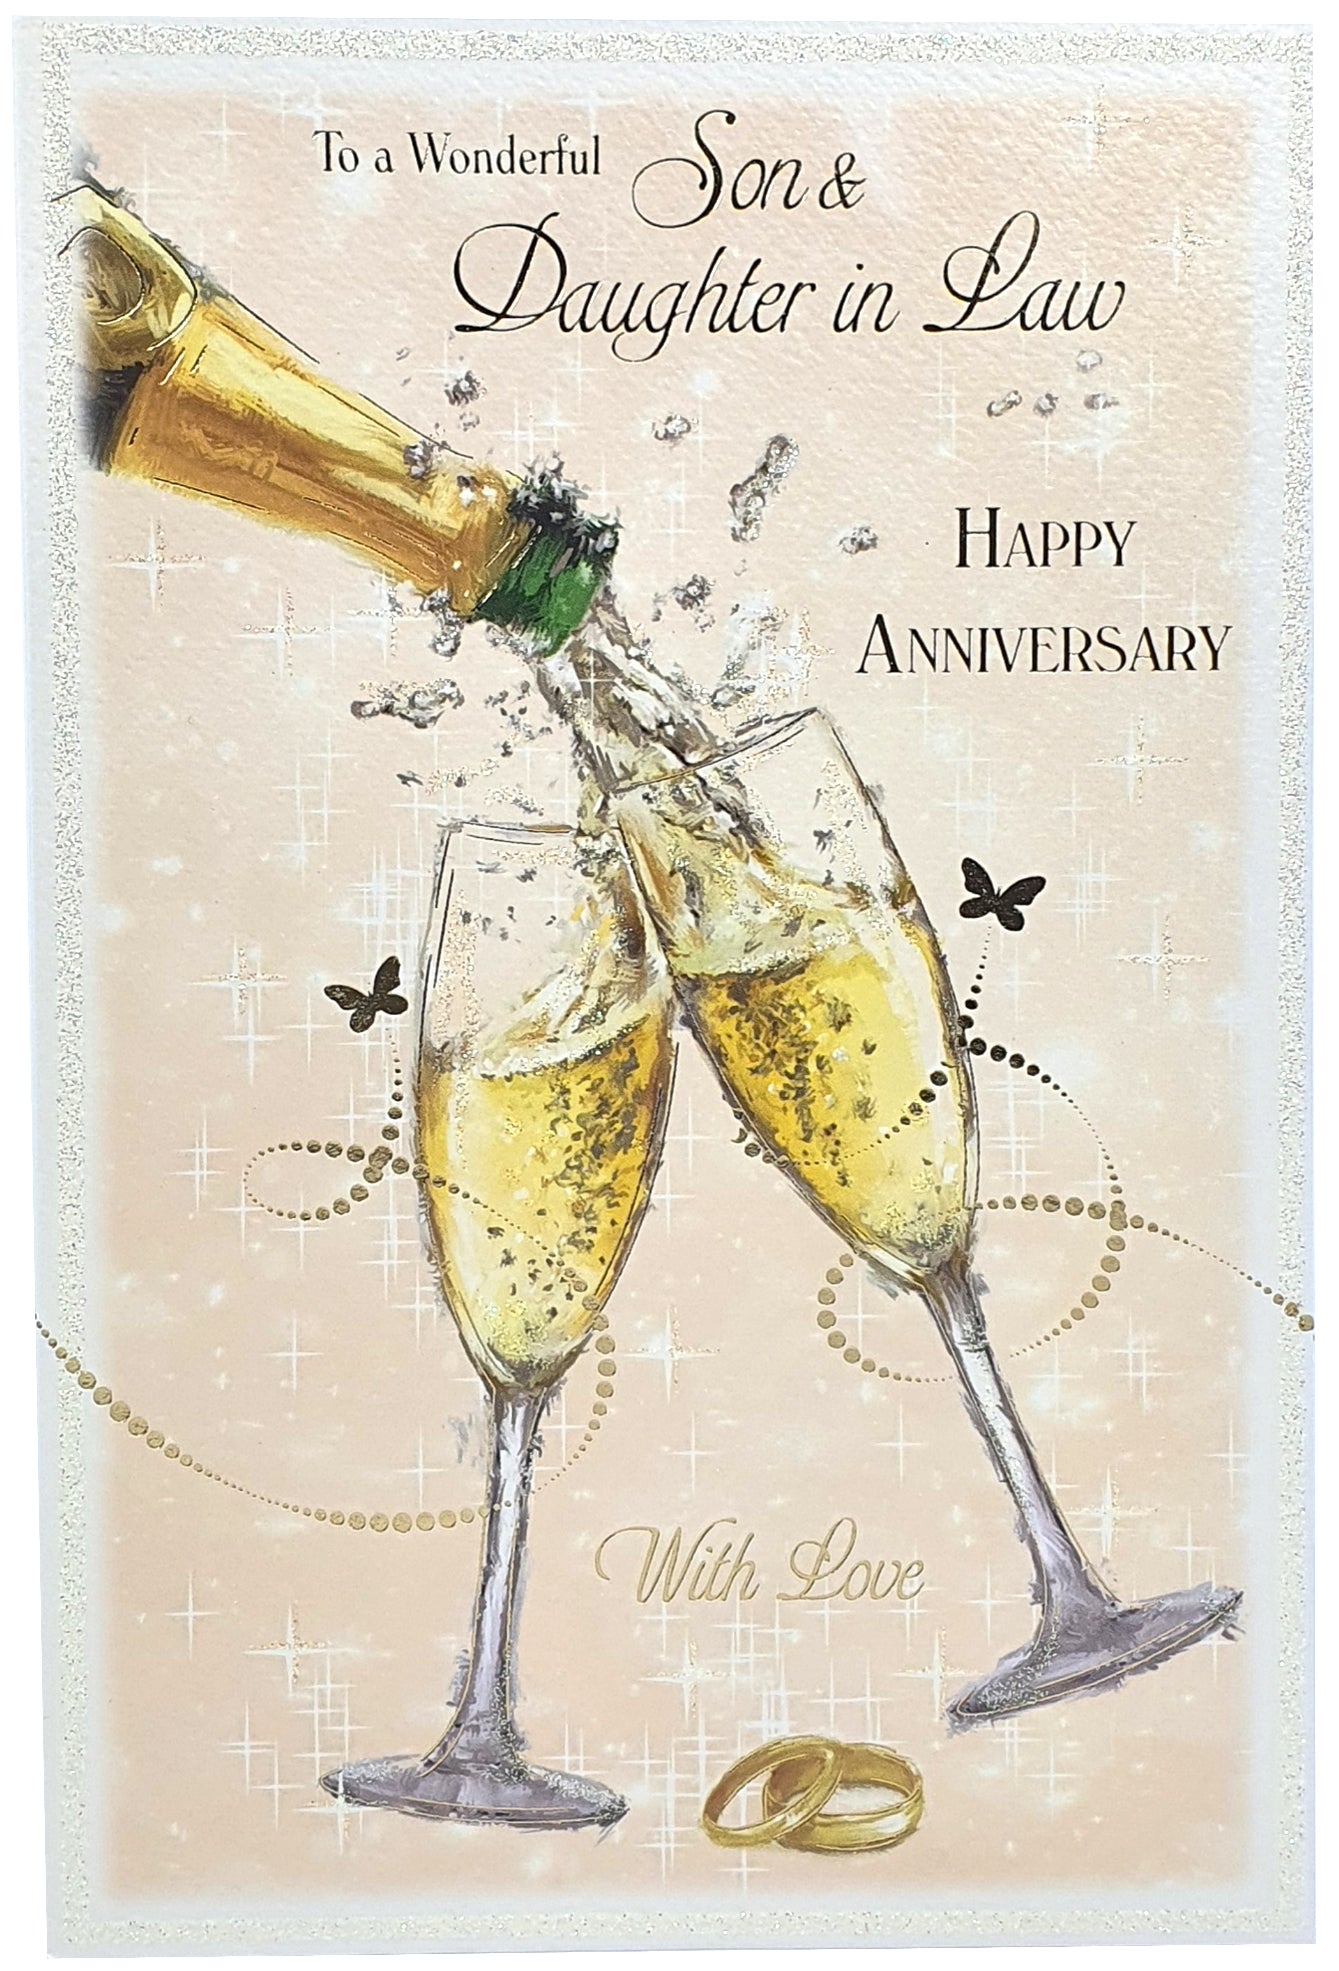 Wonderful Son and Daughter-In-Law Wedding Anniversay Card